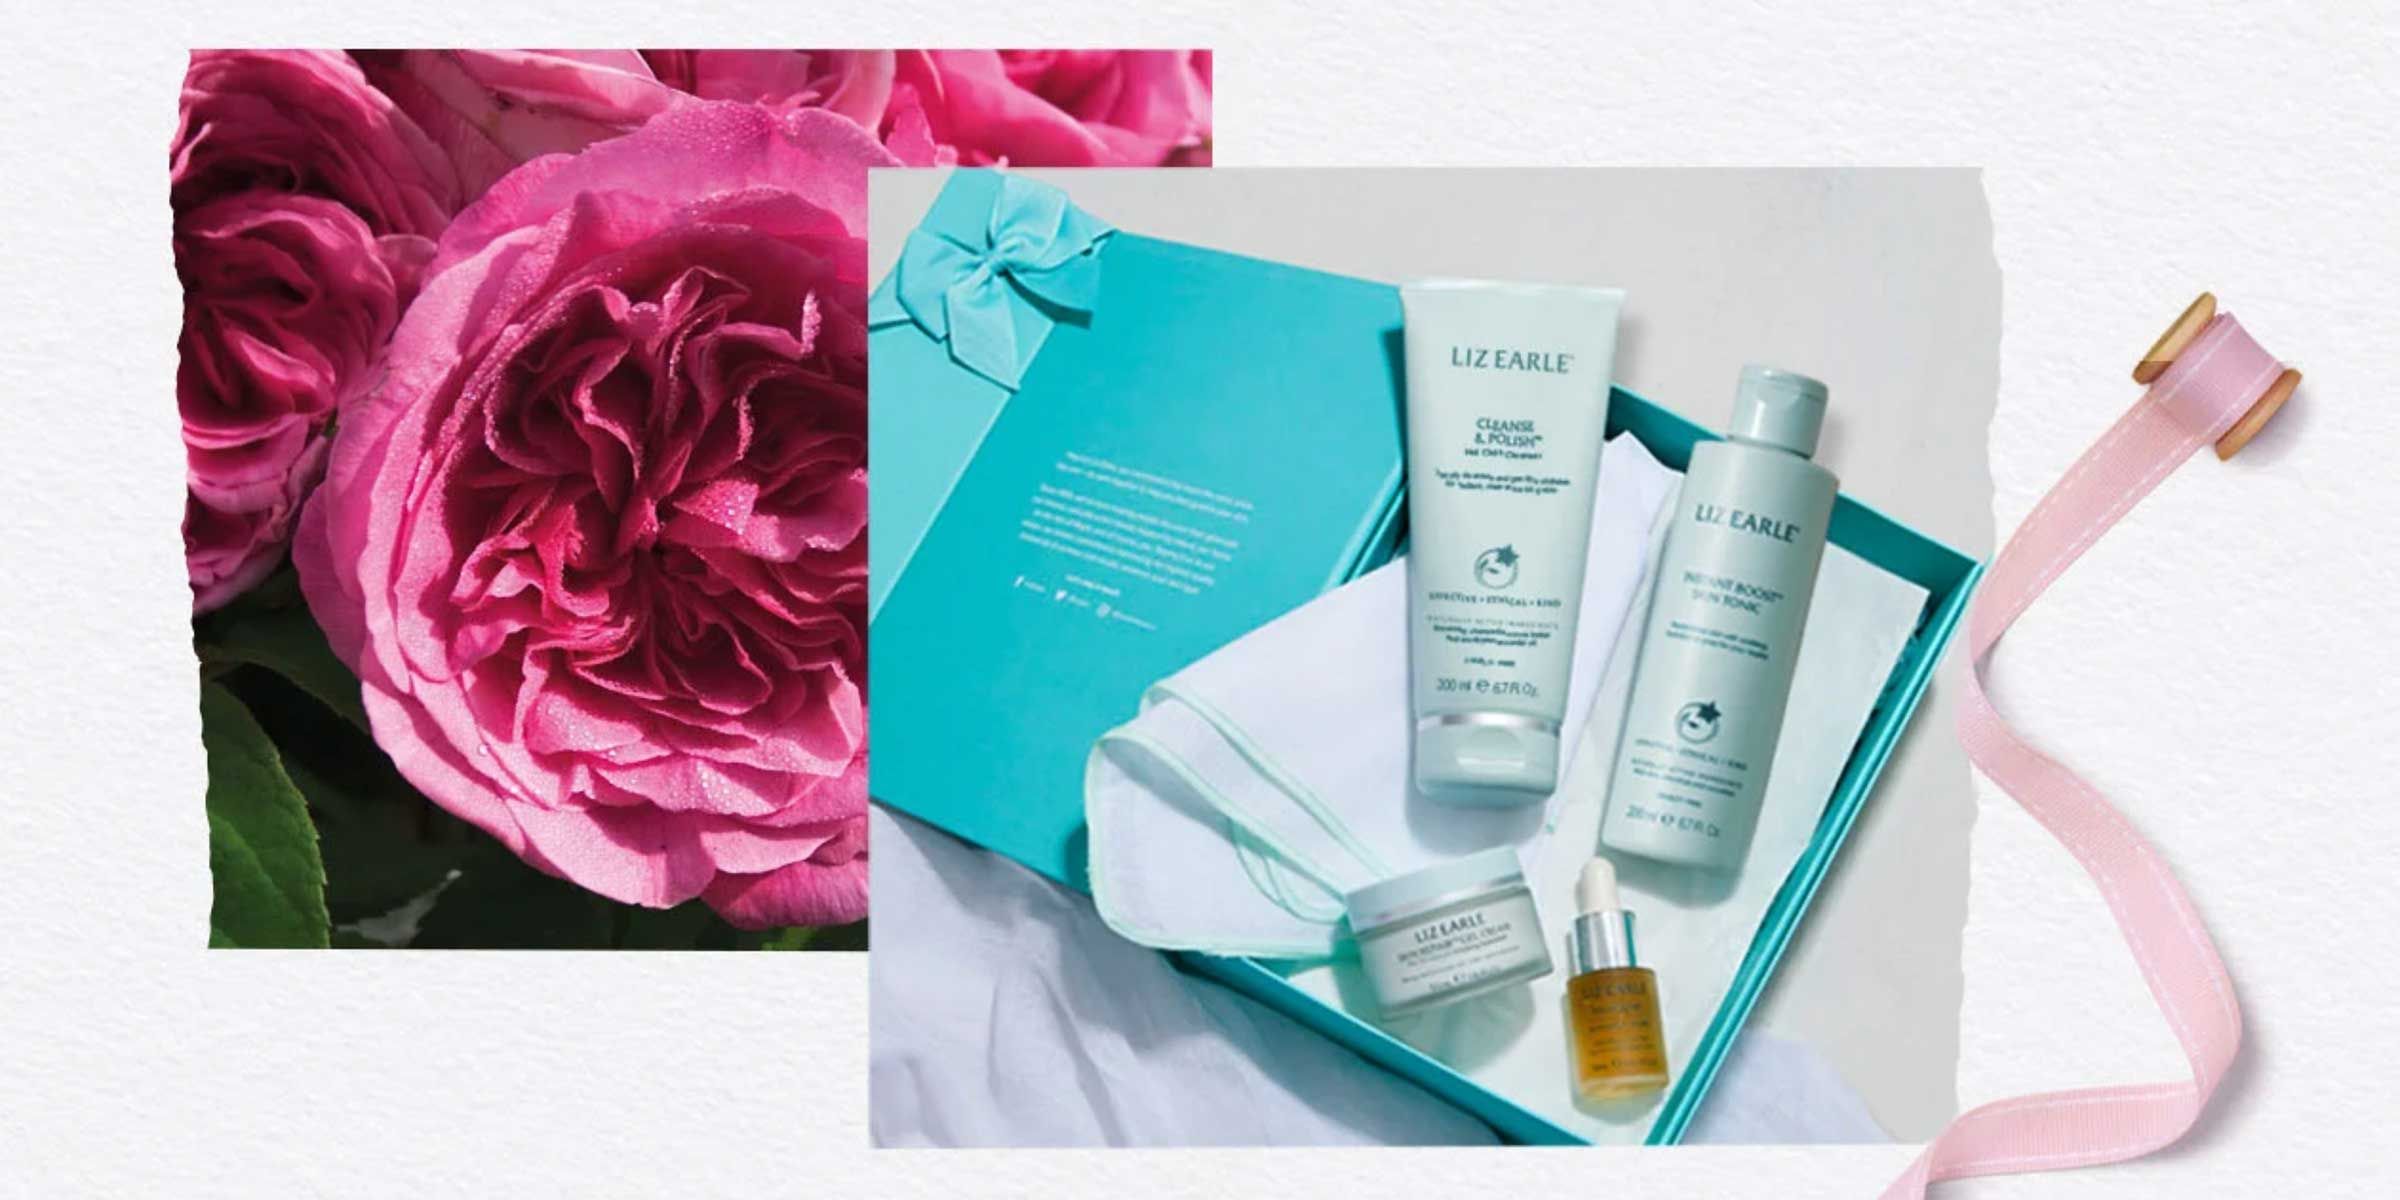 Take a look at Liz Earle Beauty Co gifting for some great ideas